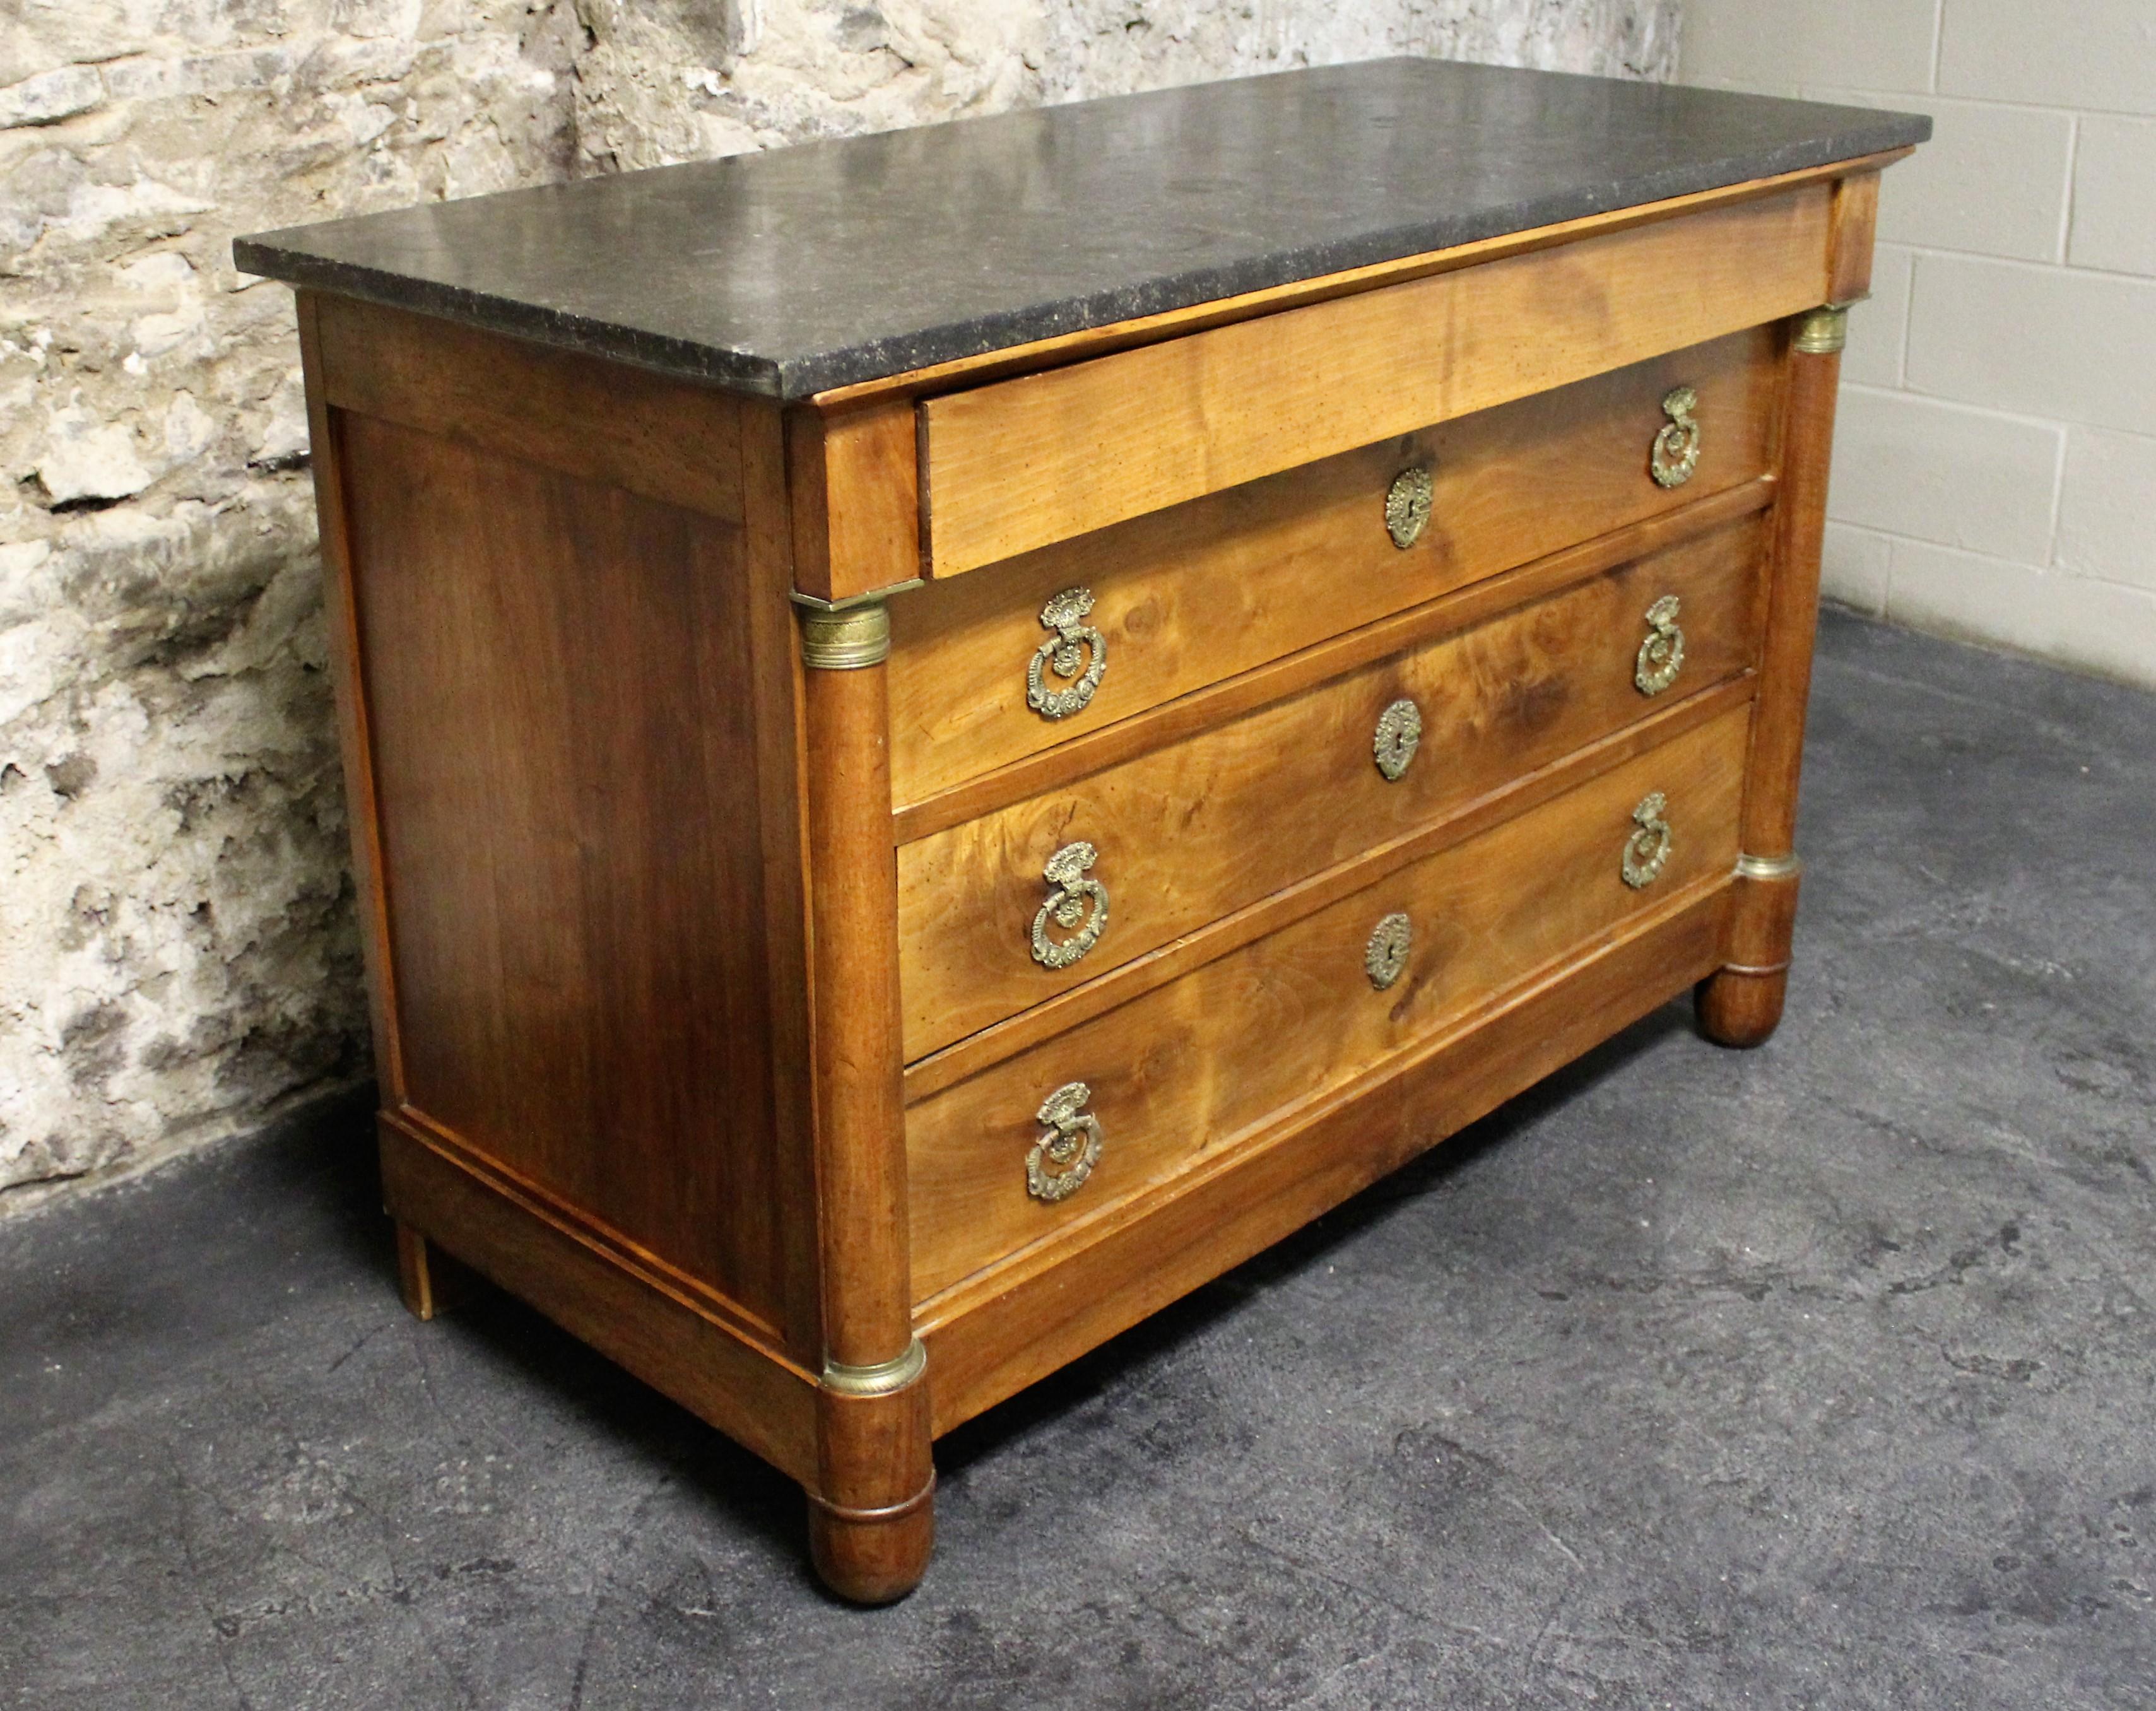 19th century French Empire three plus one drawer walnut commode featuring bronze accents, hardware and a black marble-top.